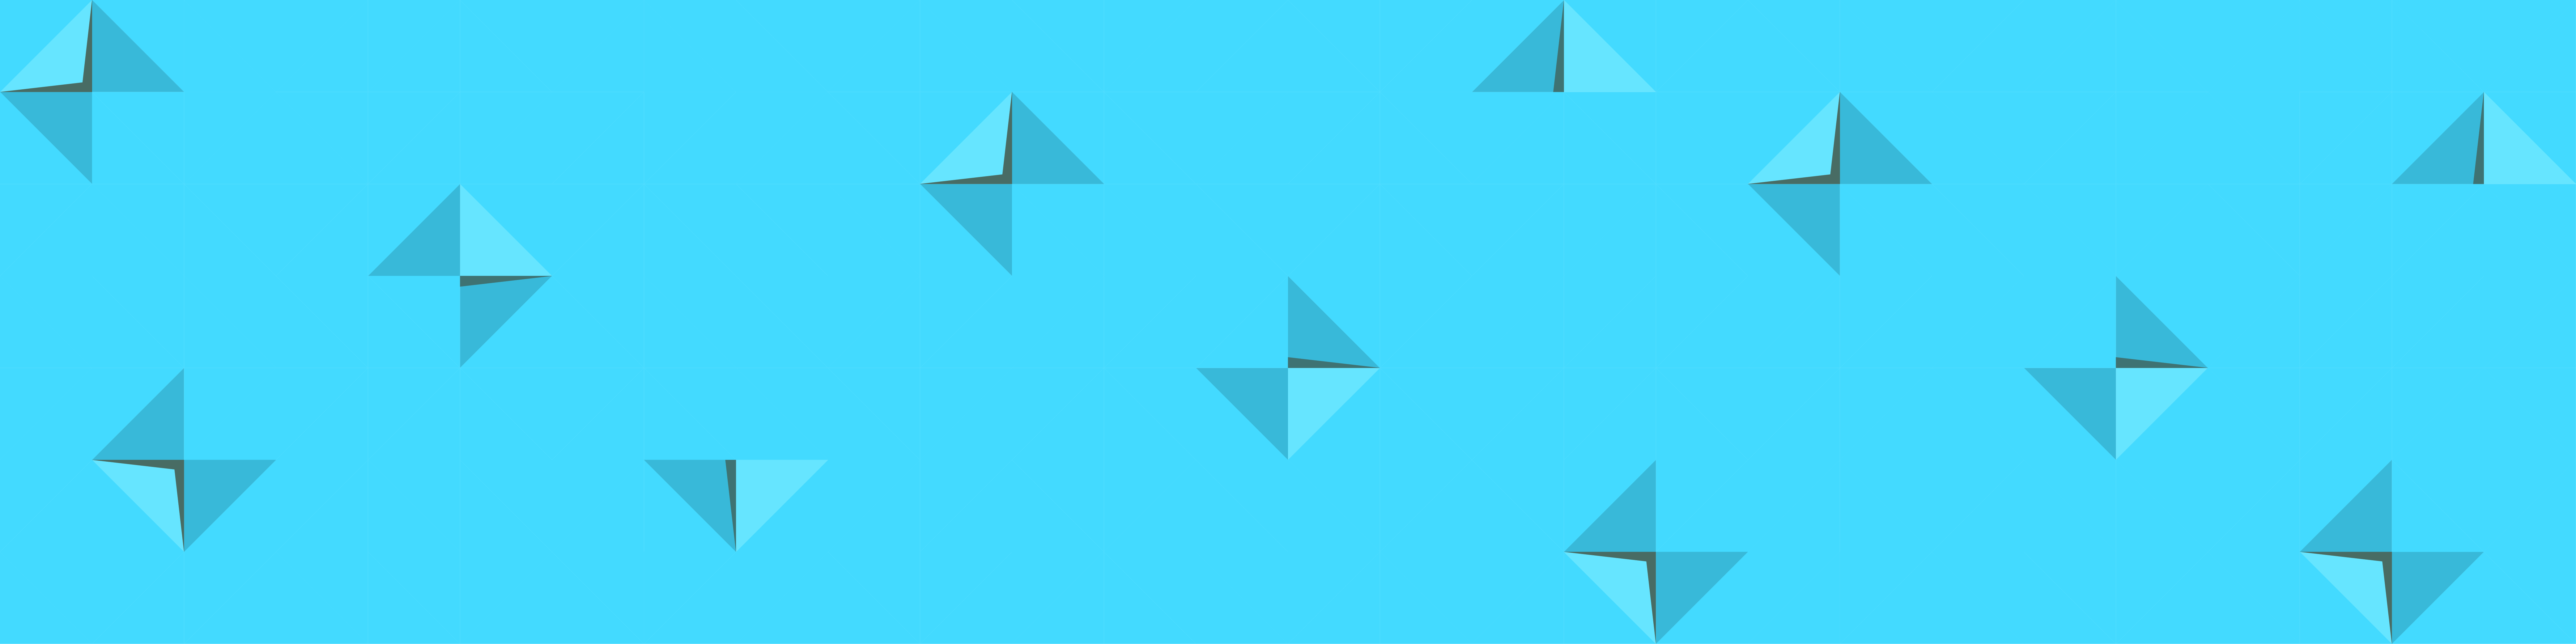 Featured Image Origami Origami Blue Little